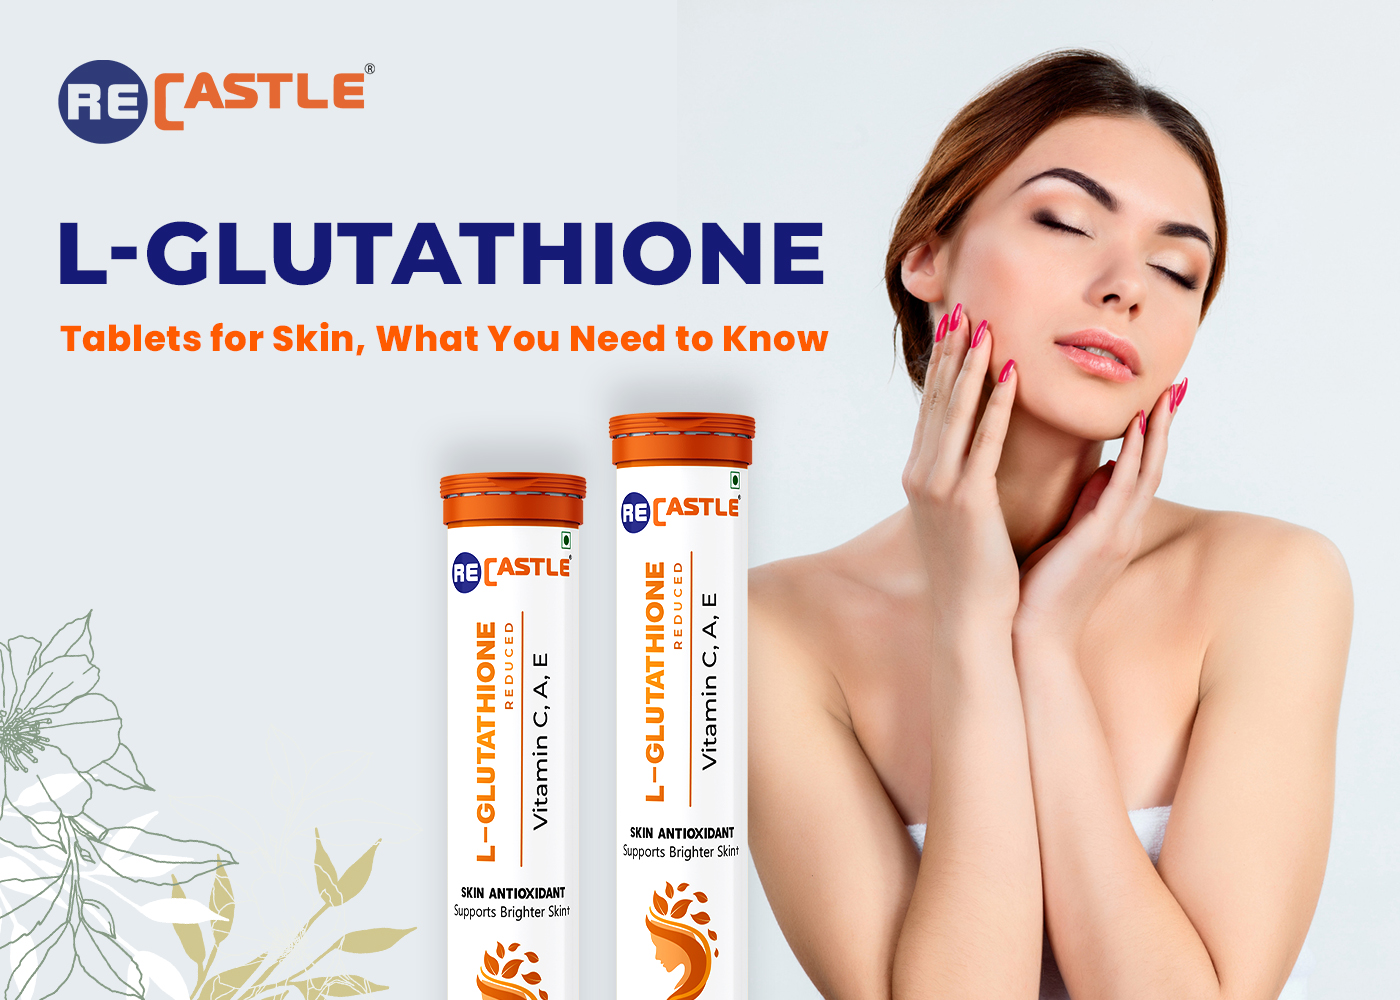 L-Glutathione Tablets for Skin: What You Need to Know | Recastle